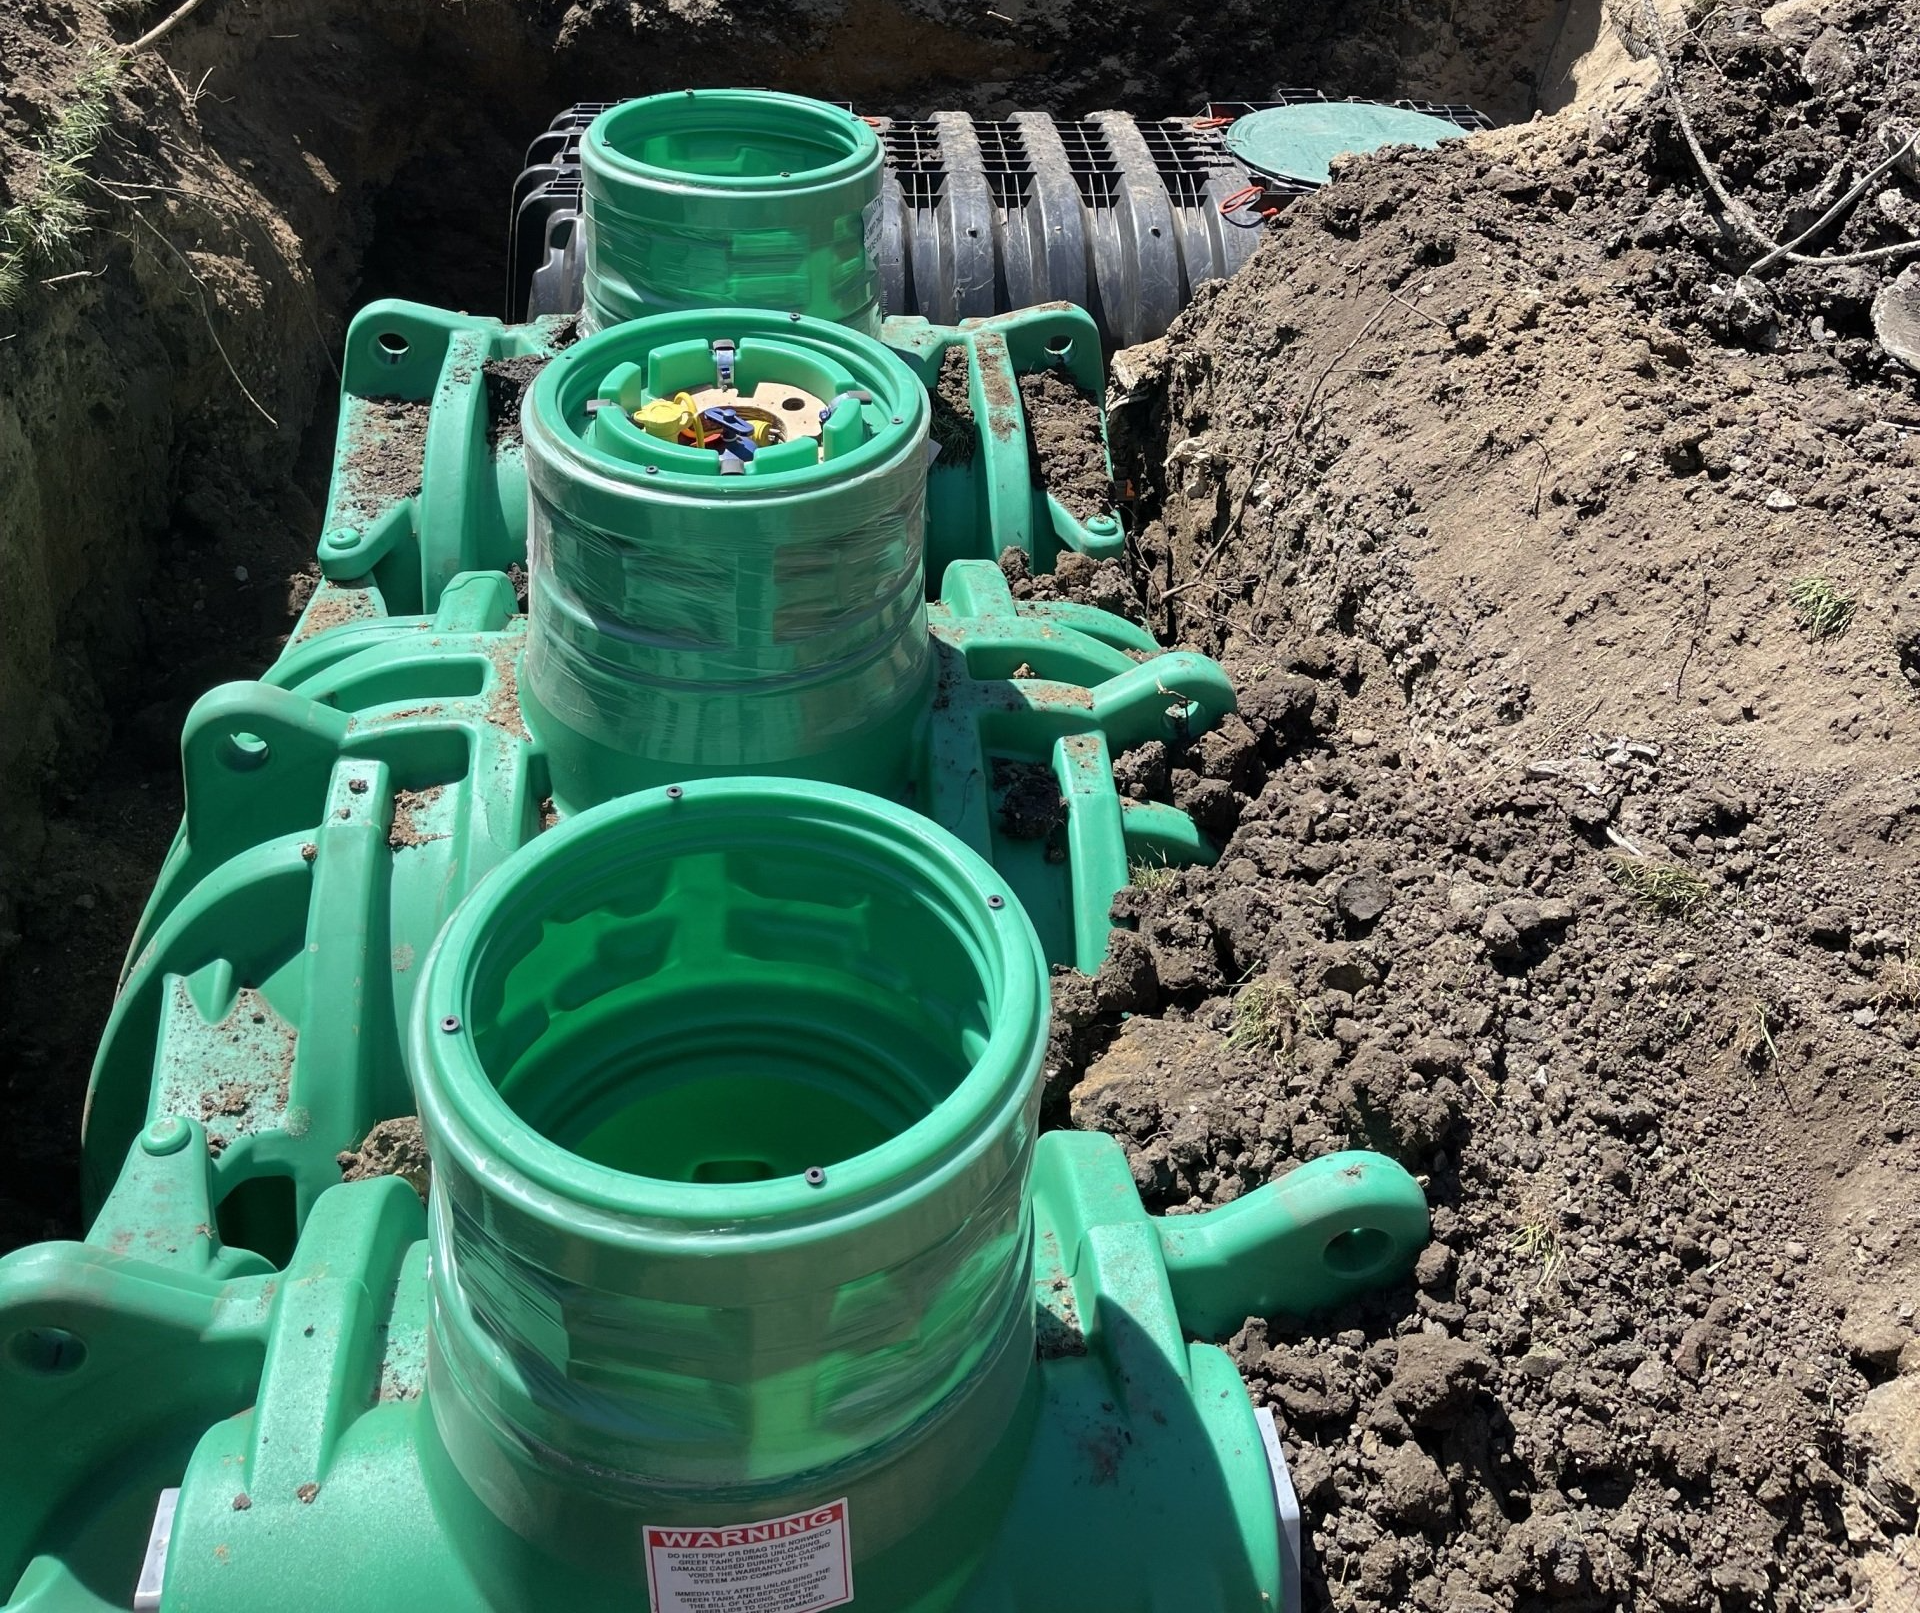 Septic Services in Lake County, IL